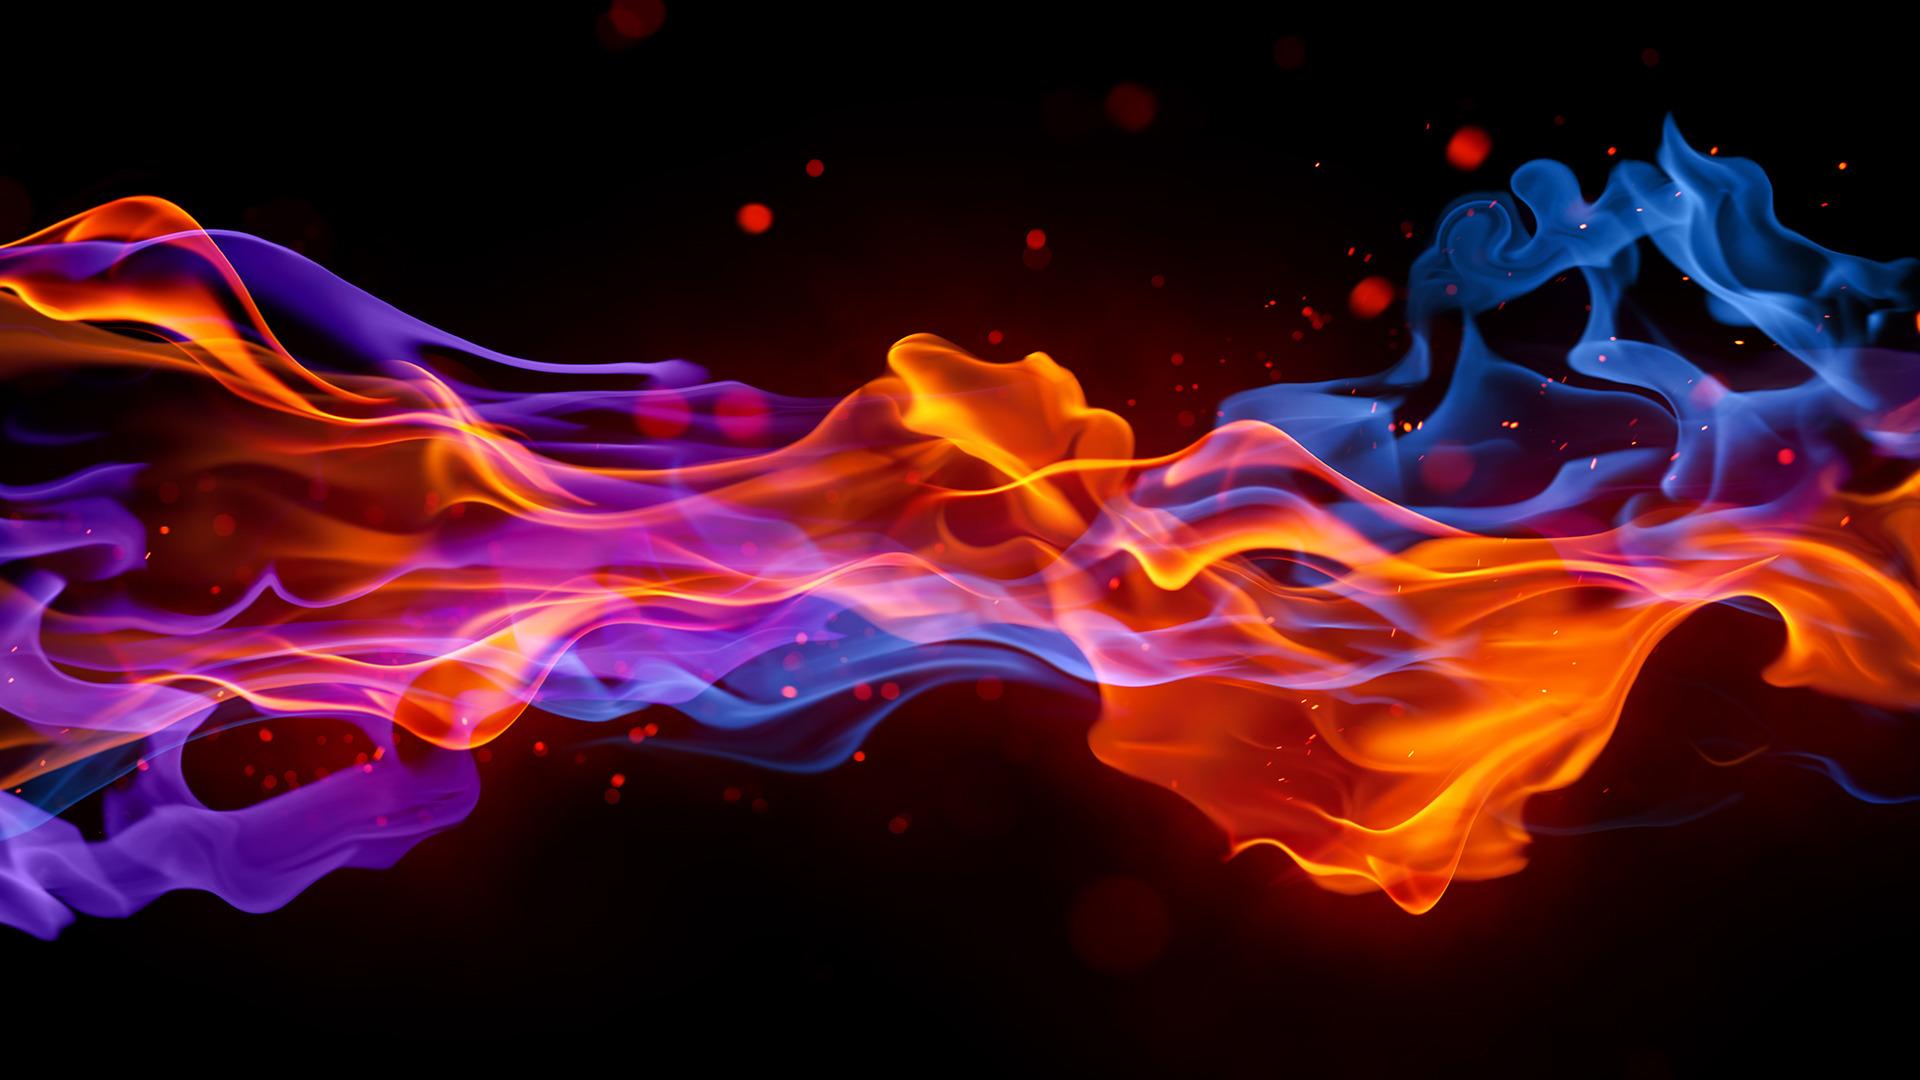 Flame Desktop Wallpaper, Flame Images Free, New Wallpapers